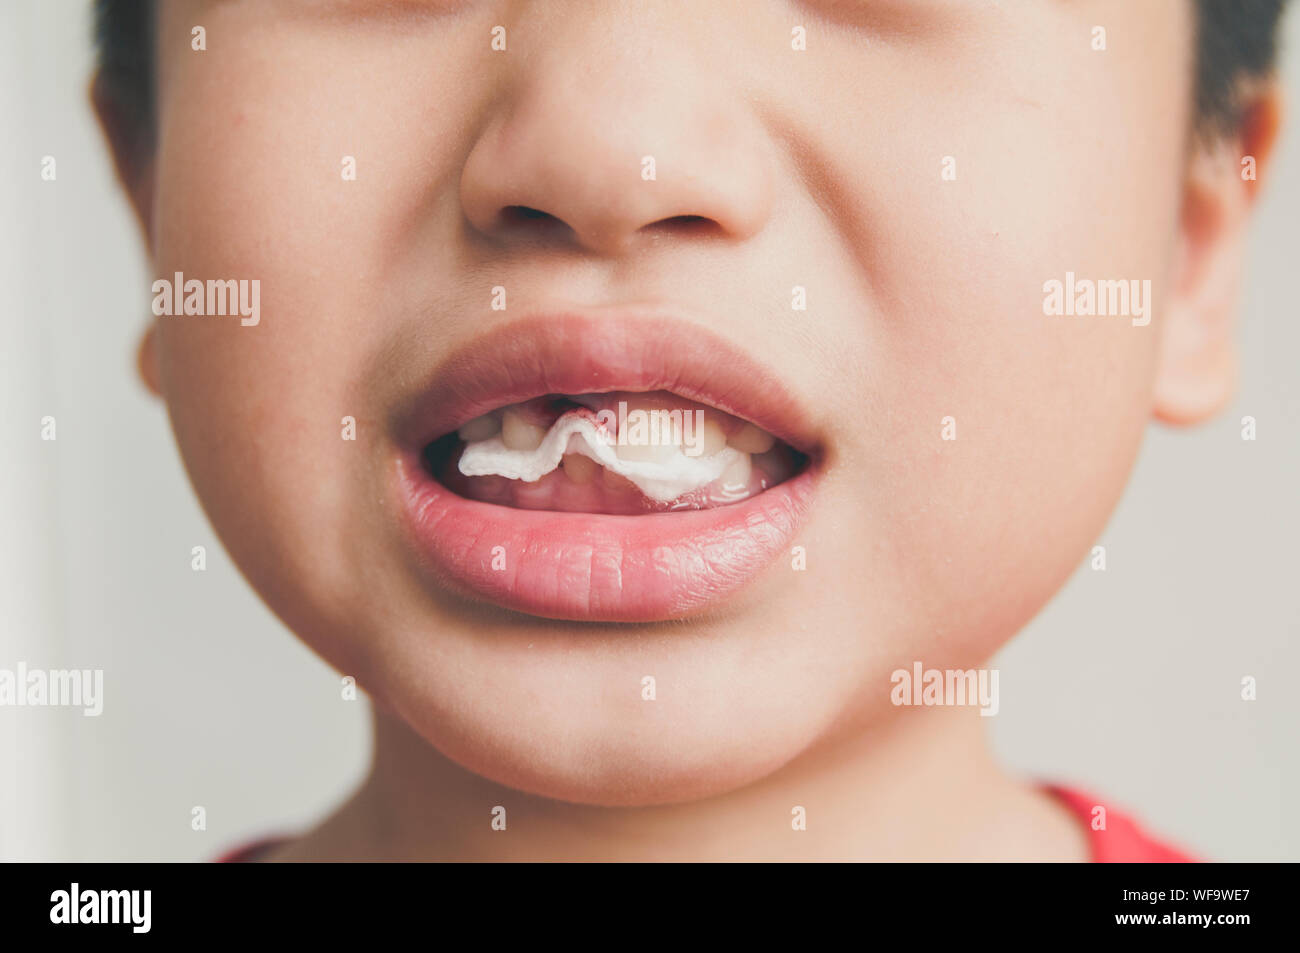 Close-up Of Young Boy With Missing Tooth Stock Photo